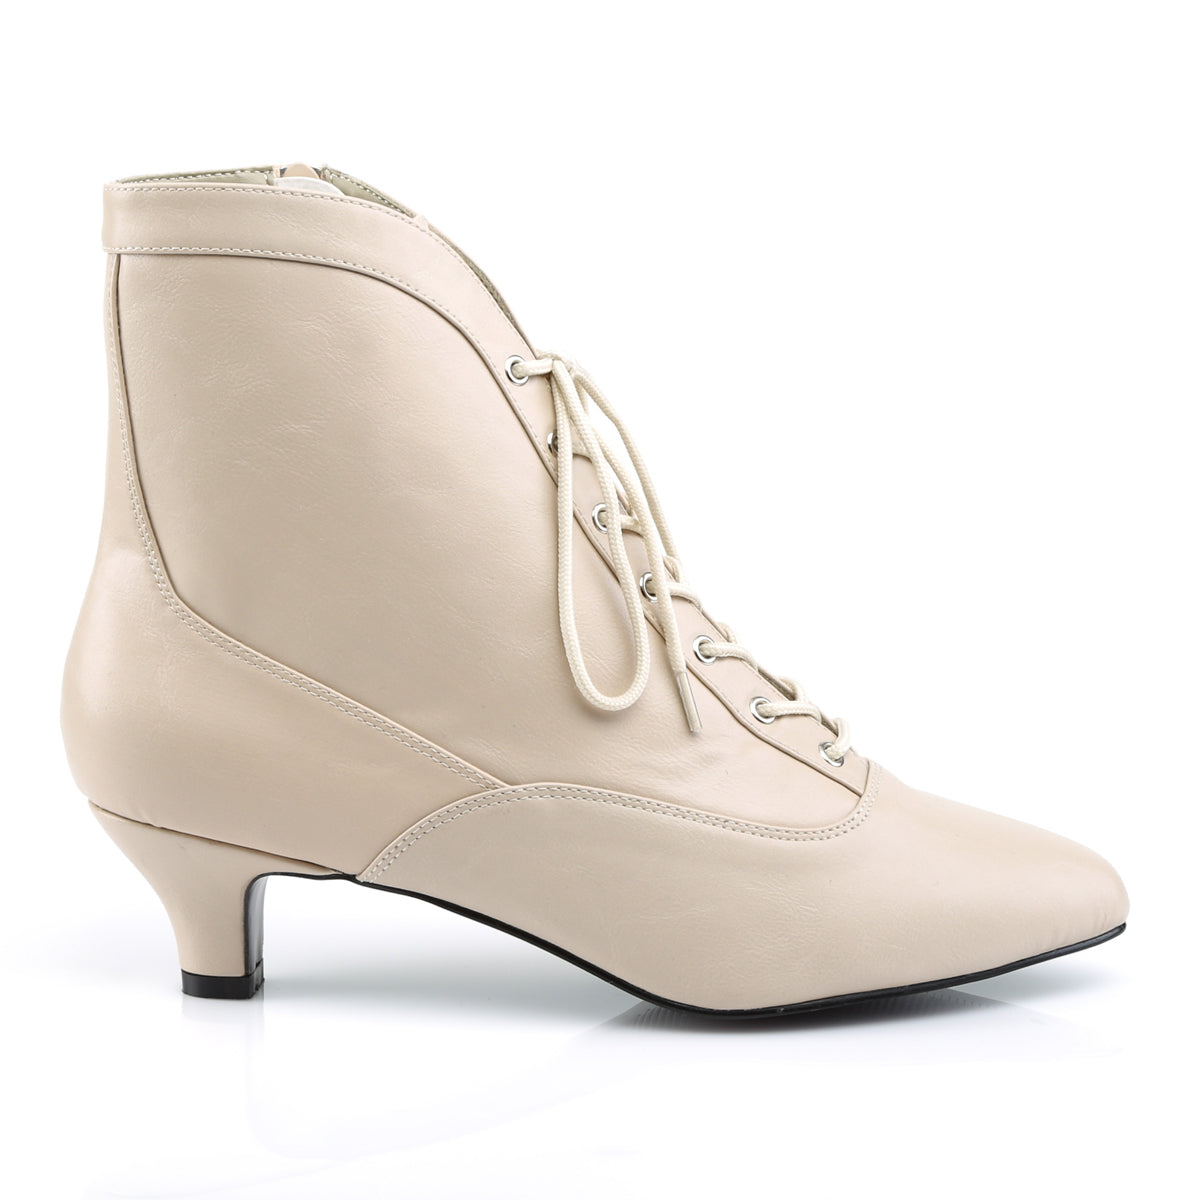 Pleaser Pink Label Womens Ankle Boots FAB-1005 Cream Faux Leather